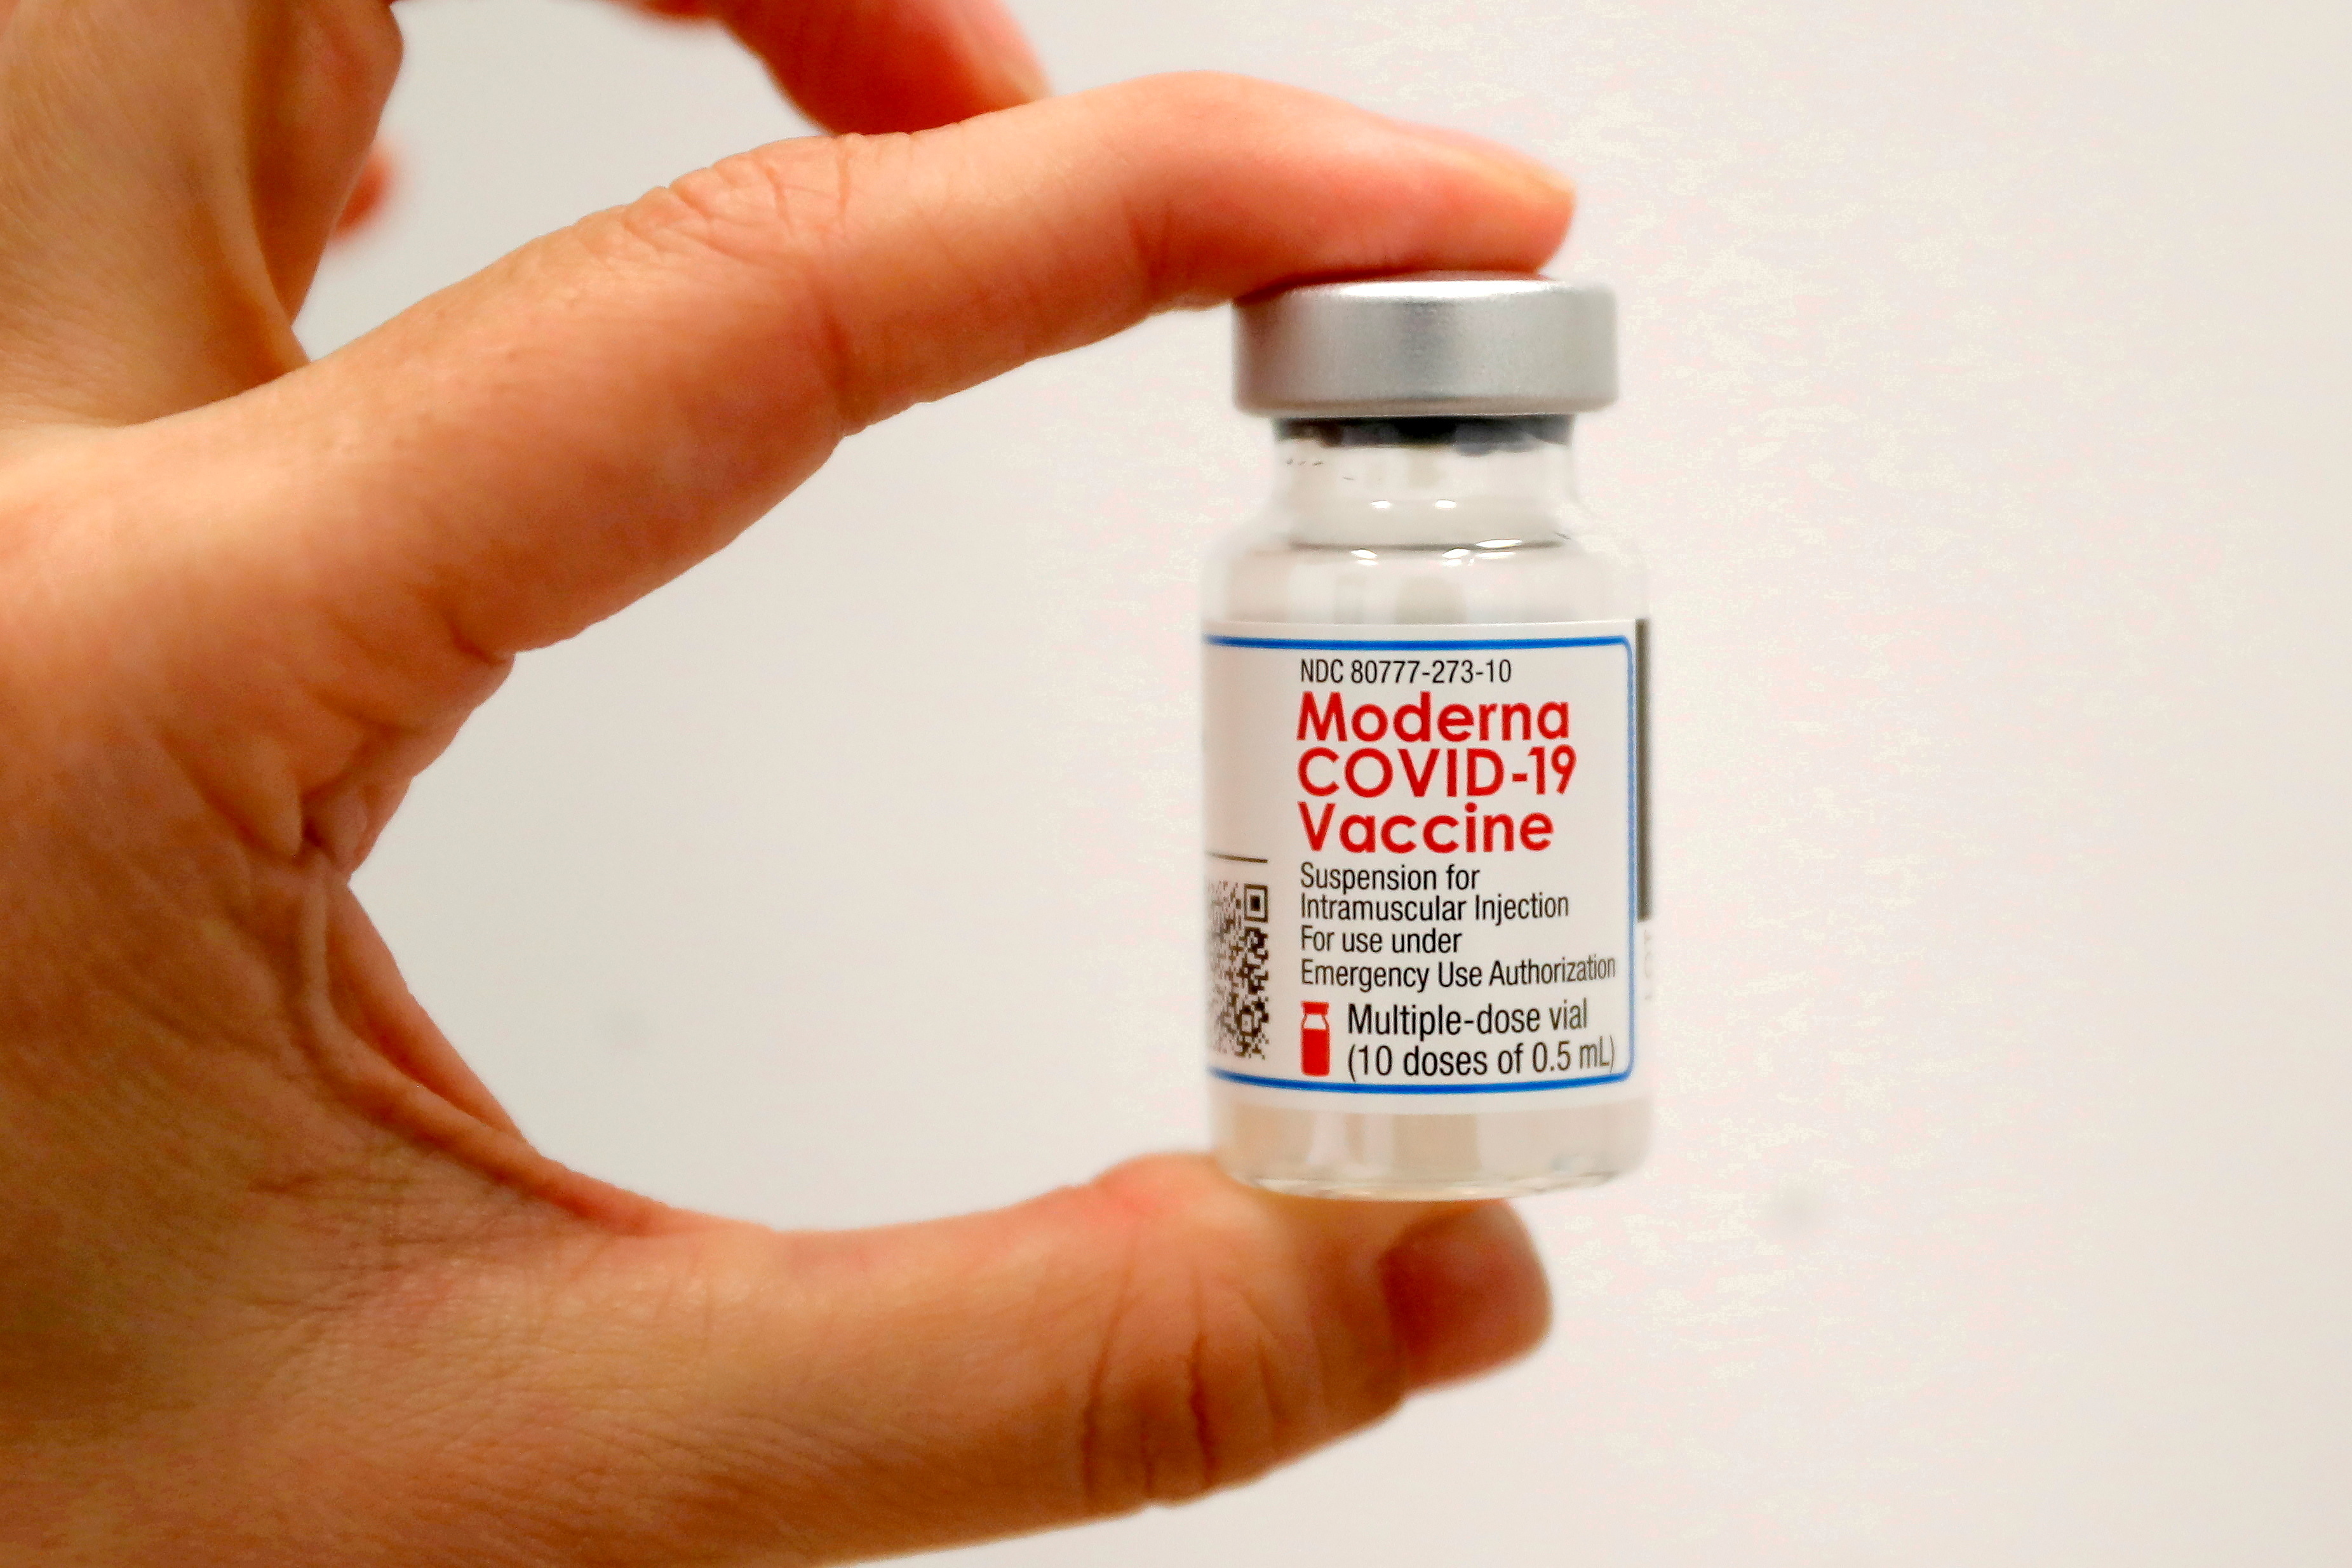 A healthcare worker holds a vial of the Moderna COVID-19 vaccine in New York City